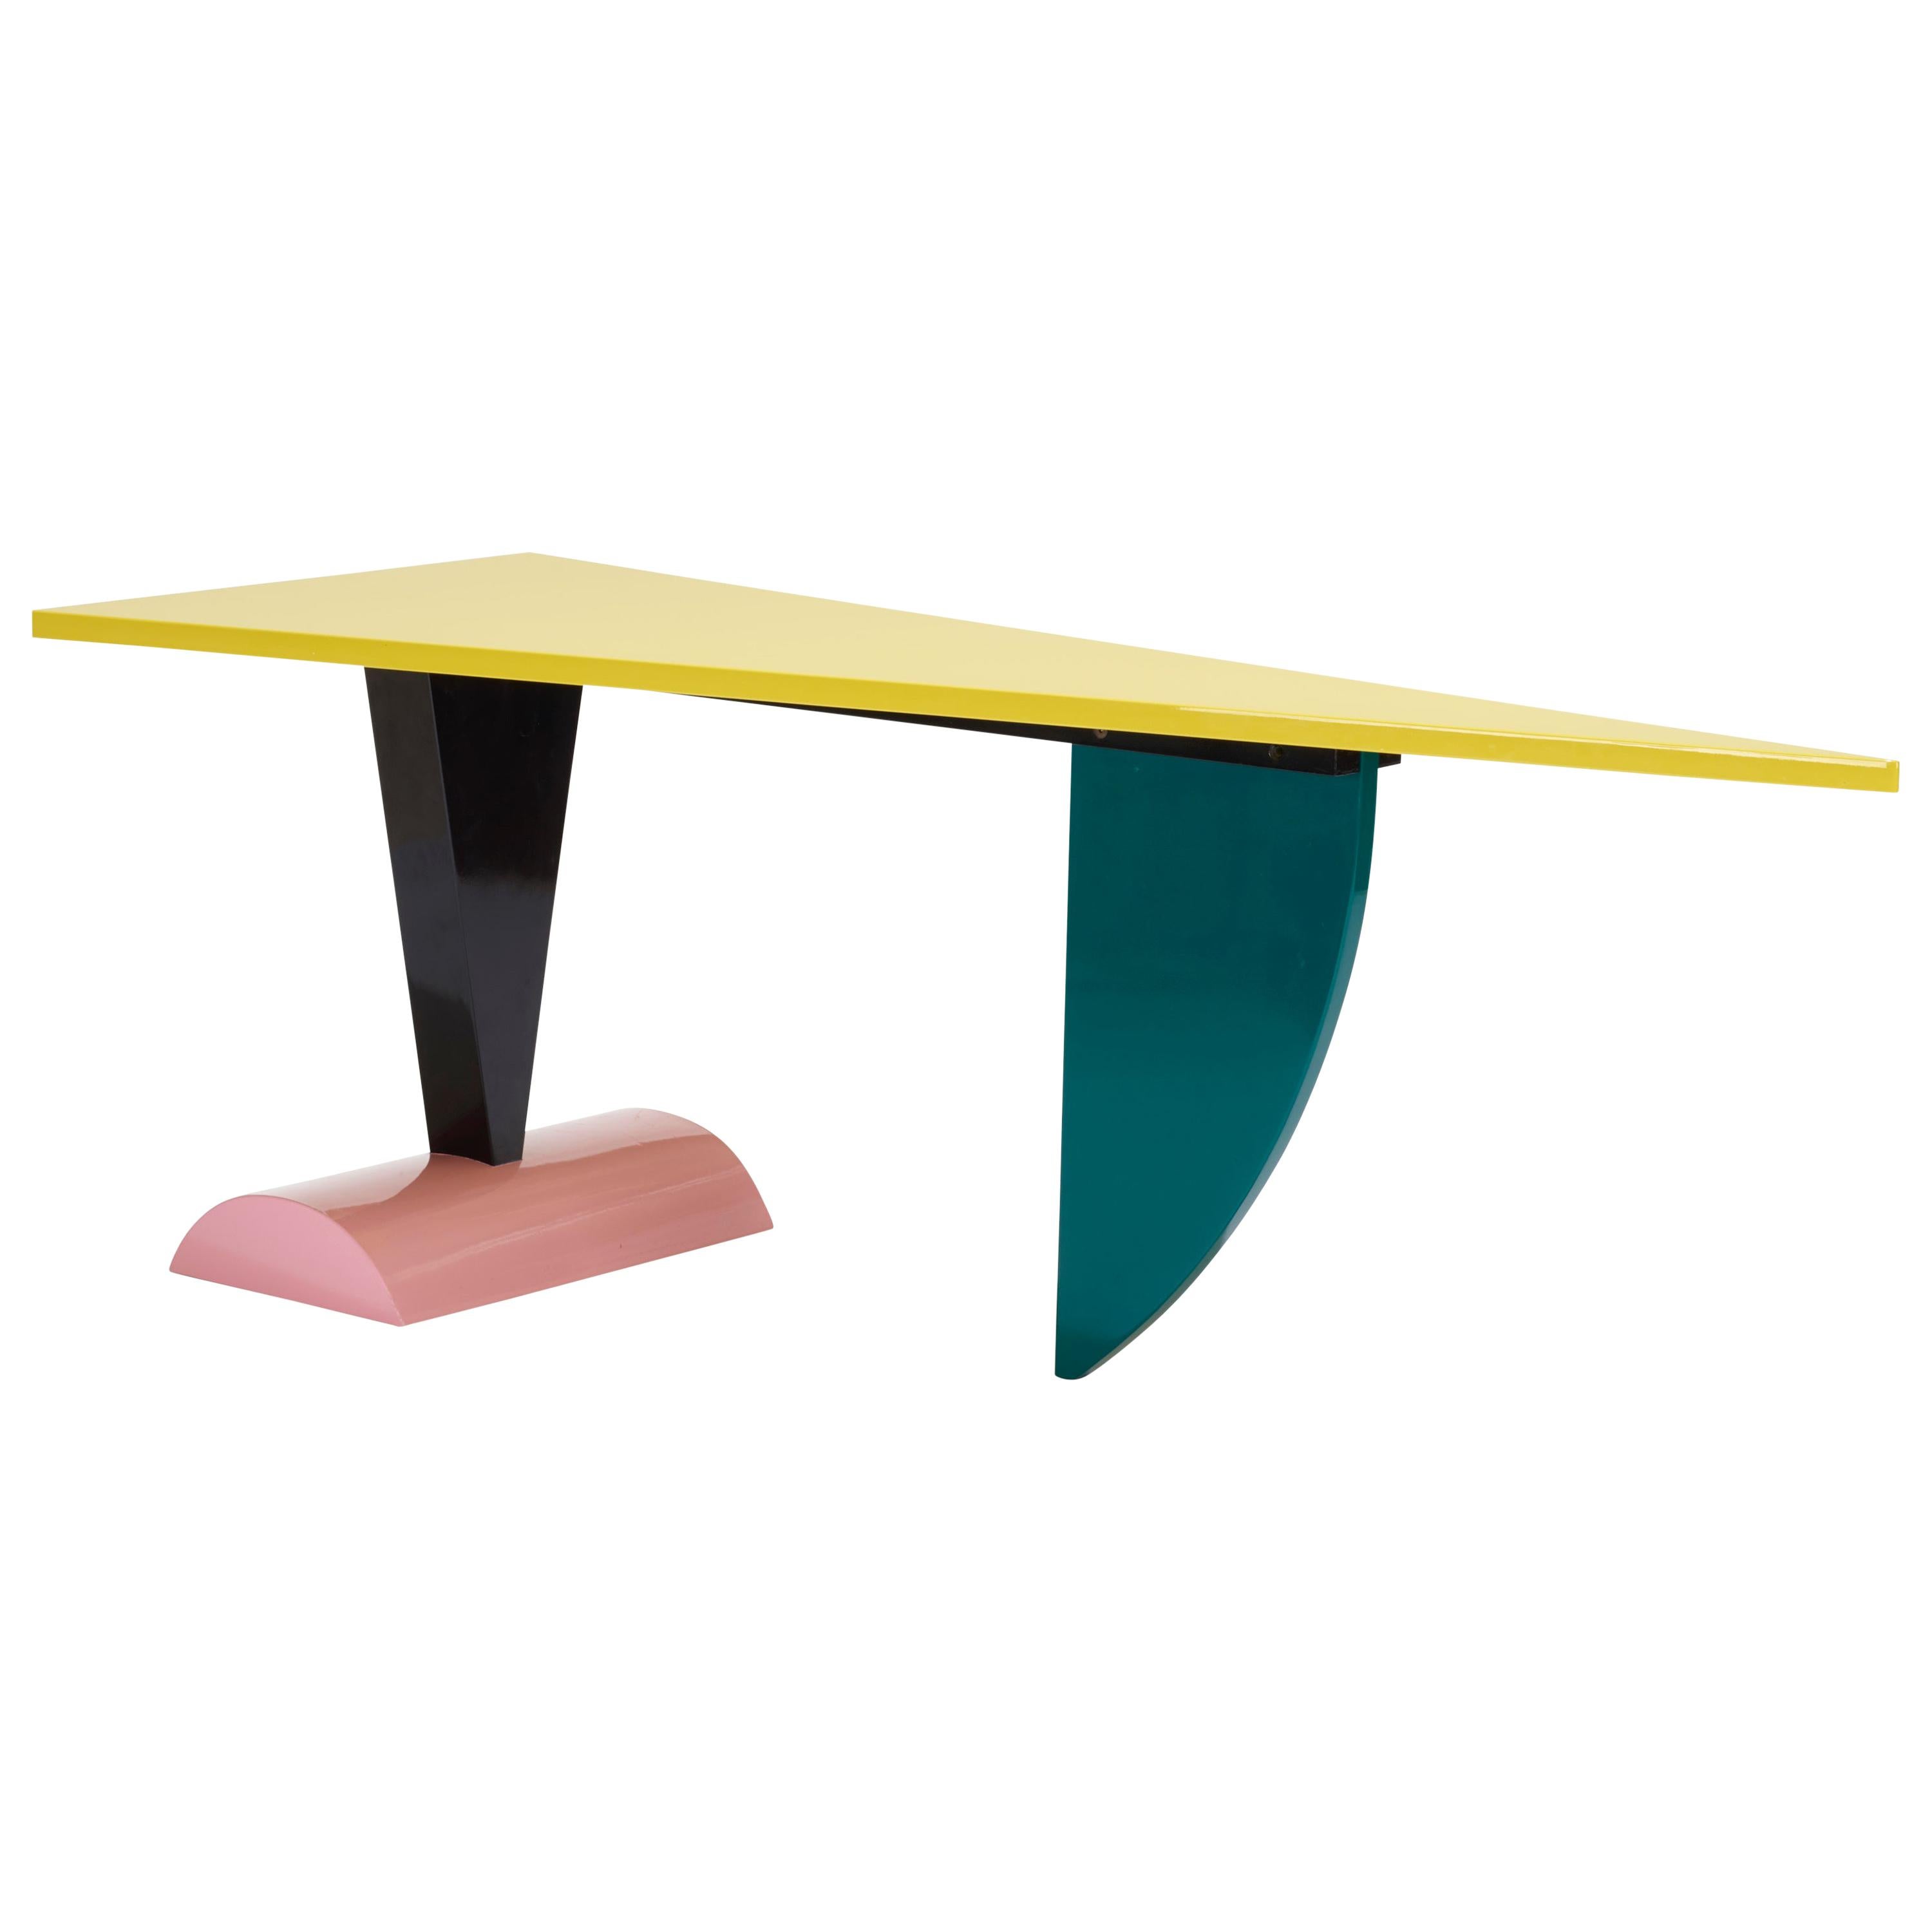 Peter Shire: Original Memphis Milano Brazil Table in Lacquered Wood, Italy 1981 im Angebot